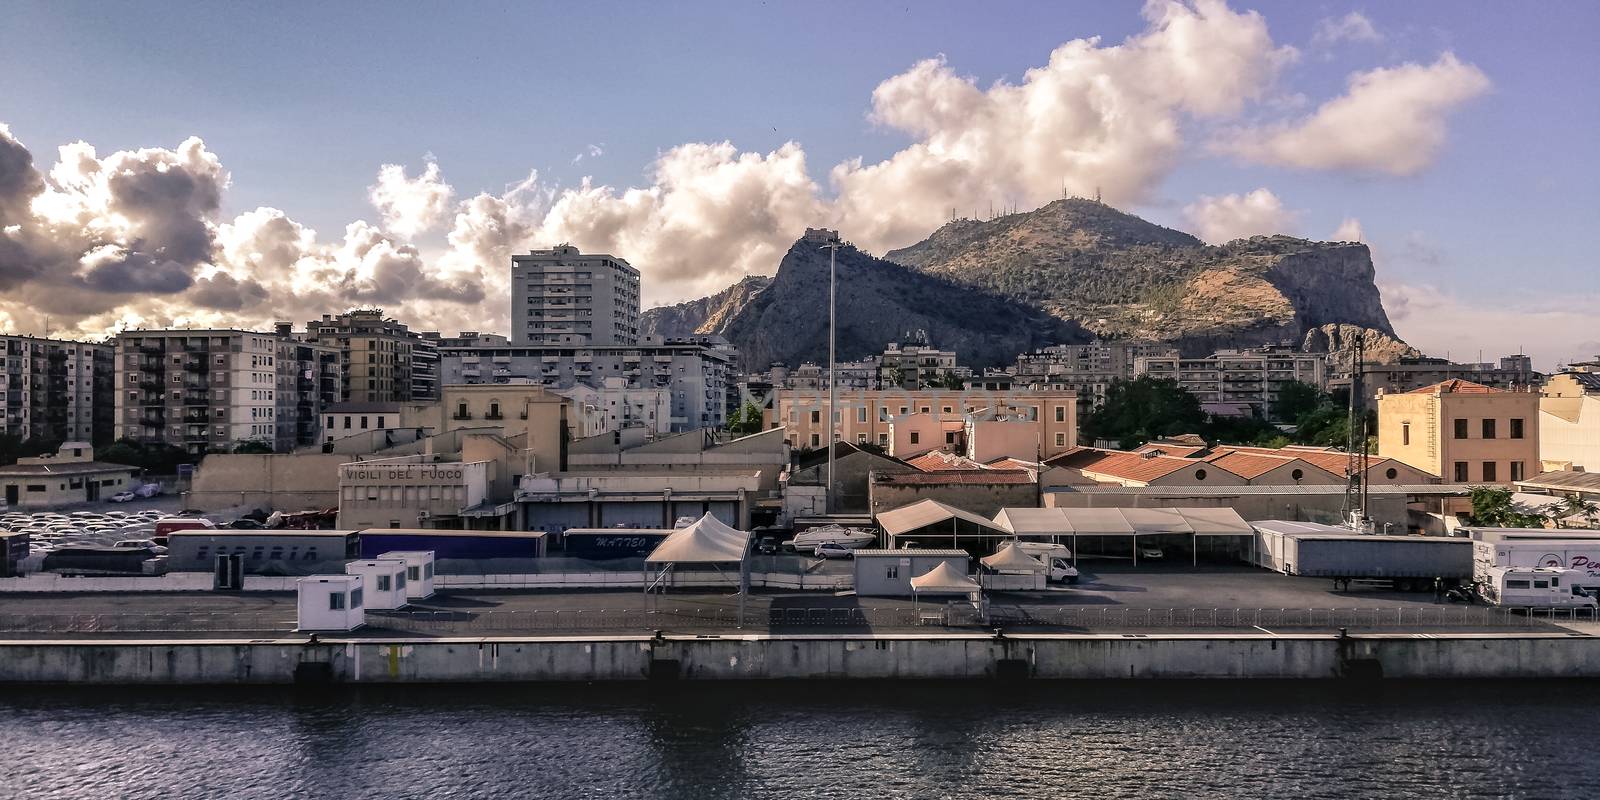 View of the Port of Palermo by pippocarlot